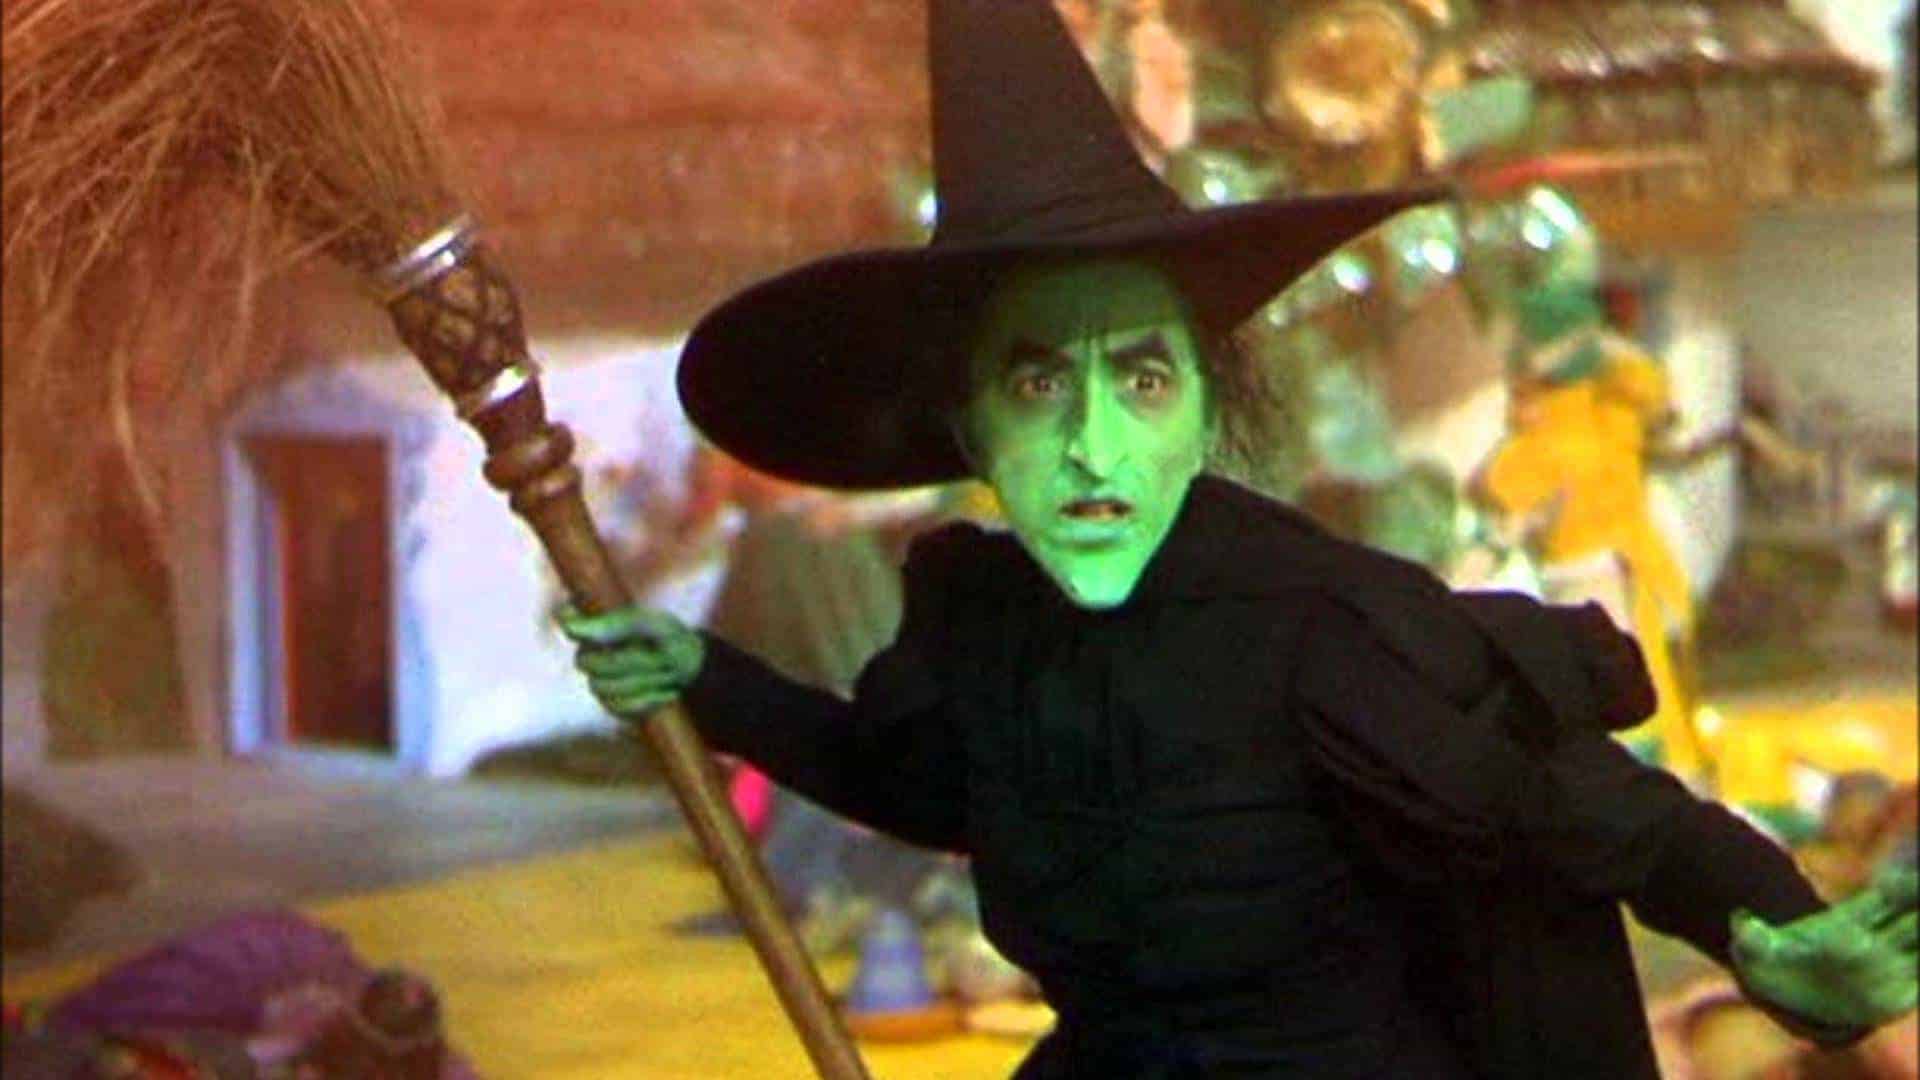 wicked witch of the west costume for Halloween